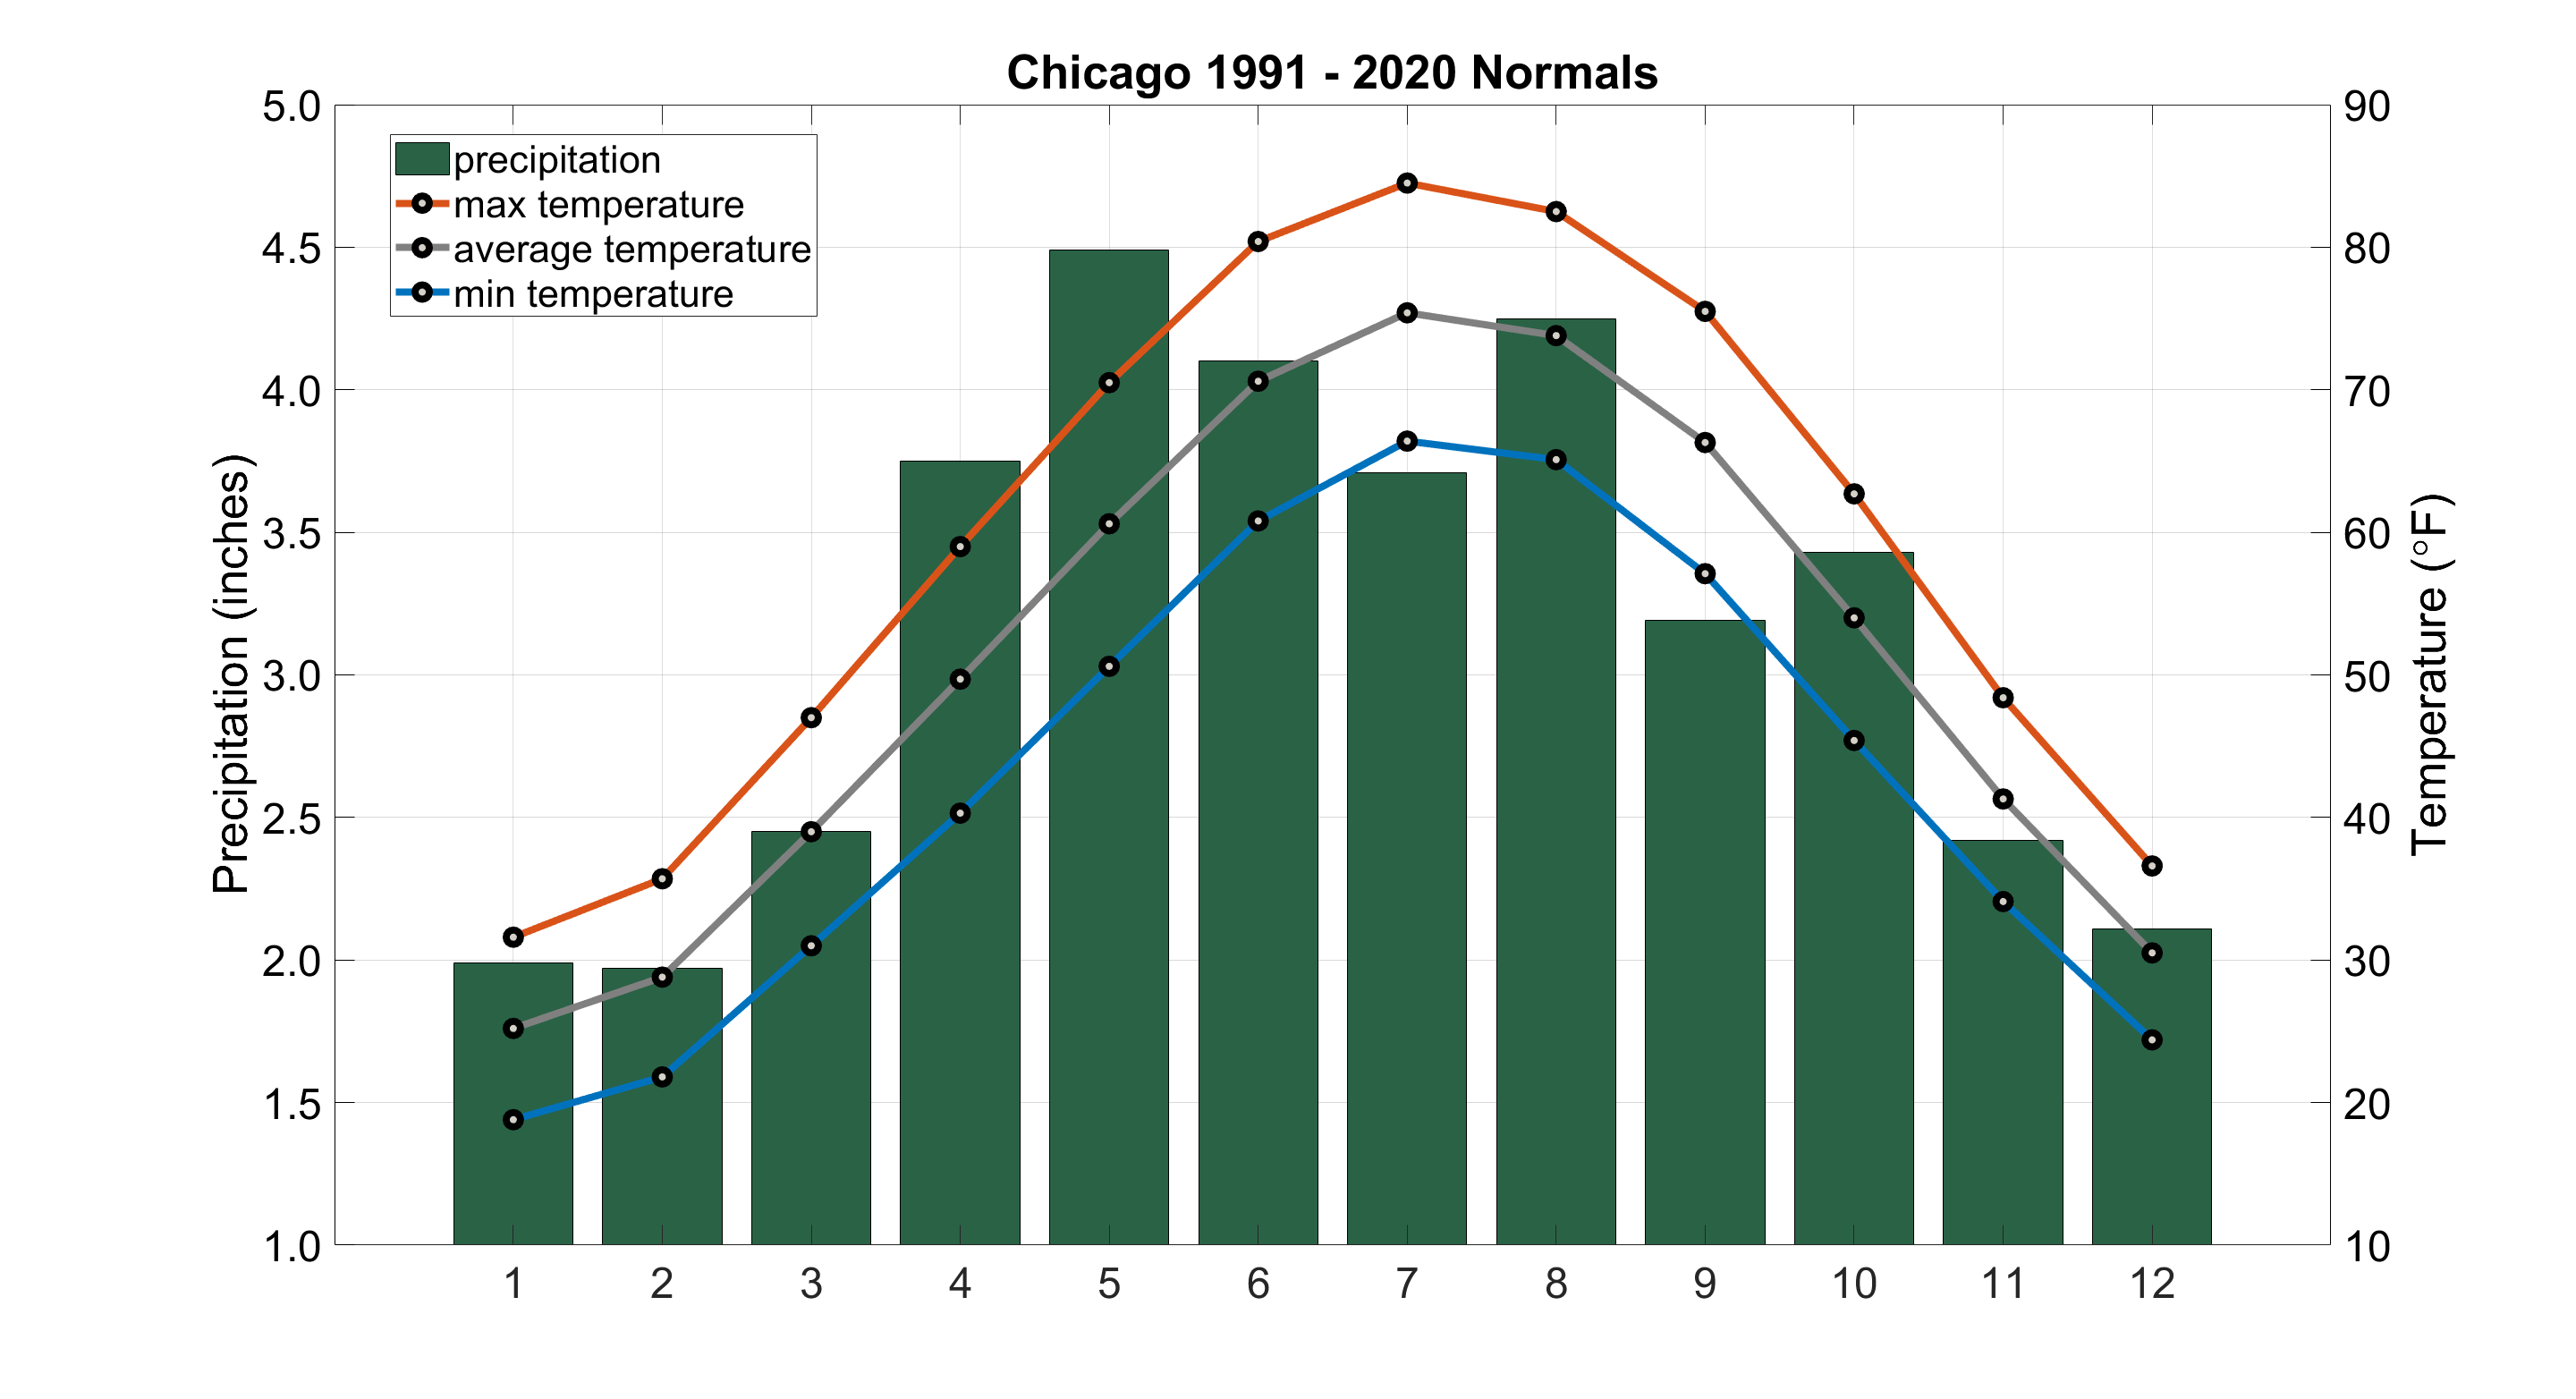 Figure shows monthly total precipitation and monthly average max, mean, and min temperature in Chicago, based on the1991-2020 normals.